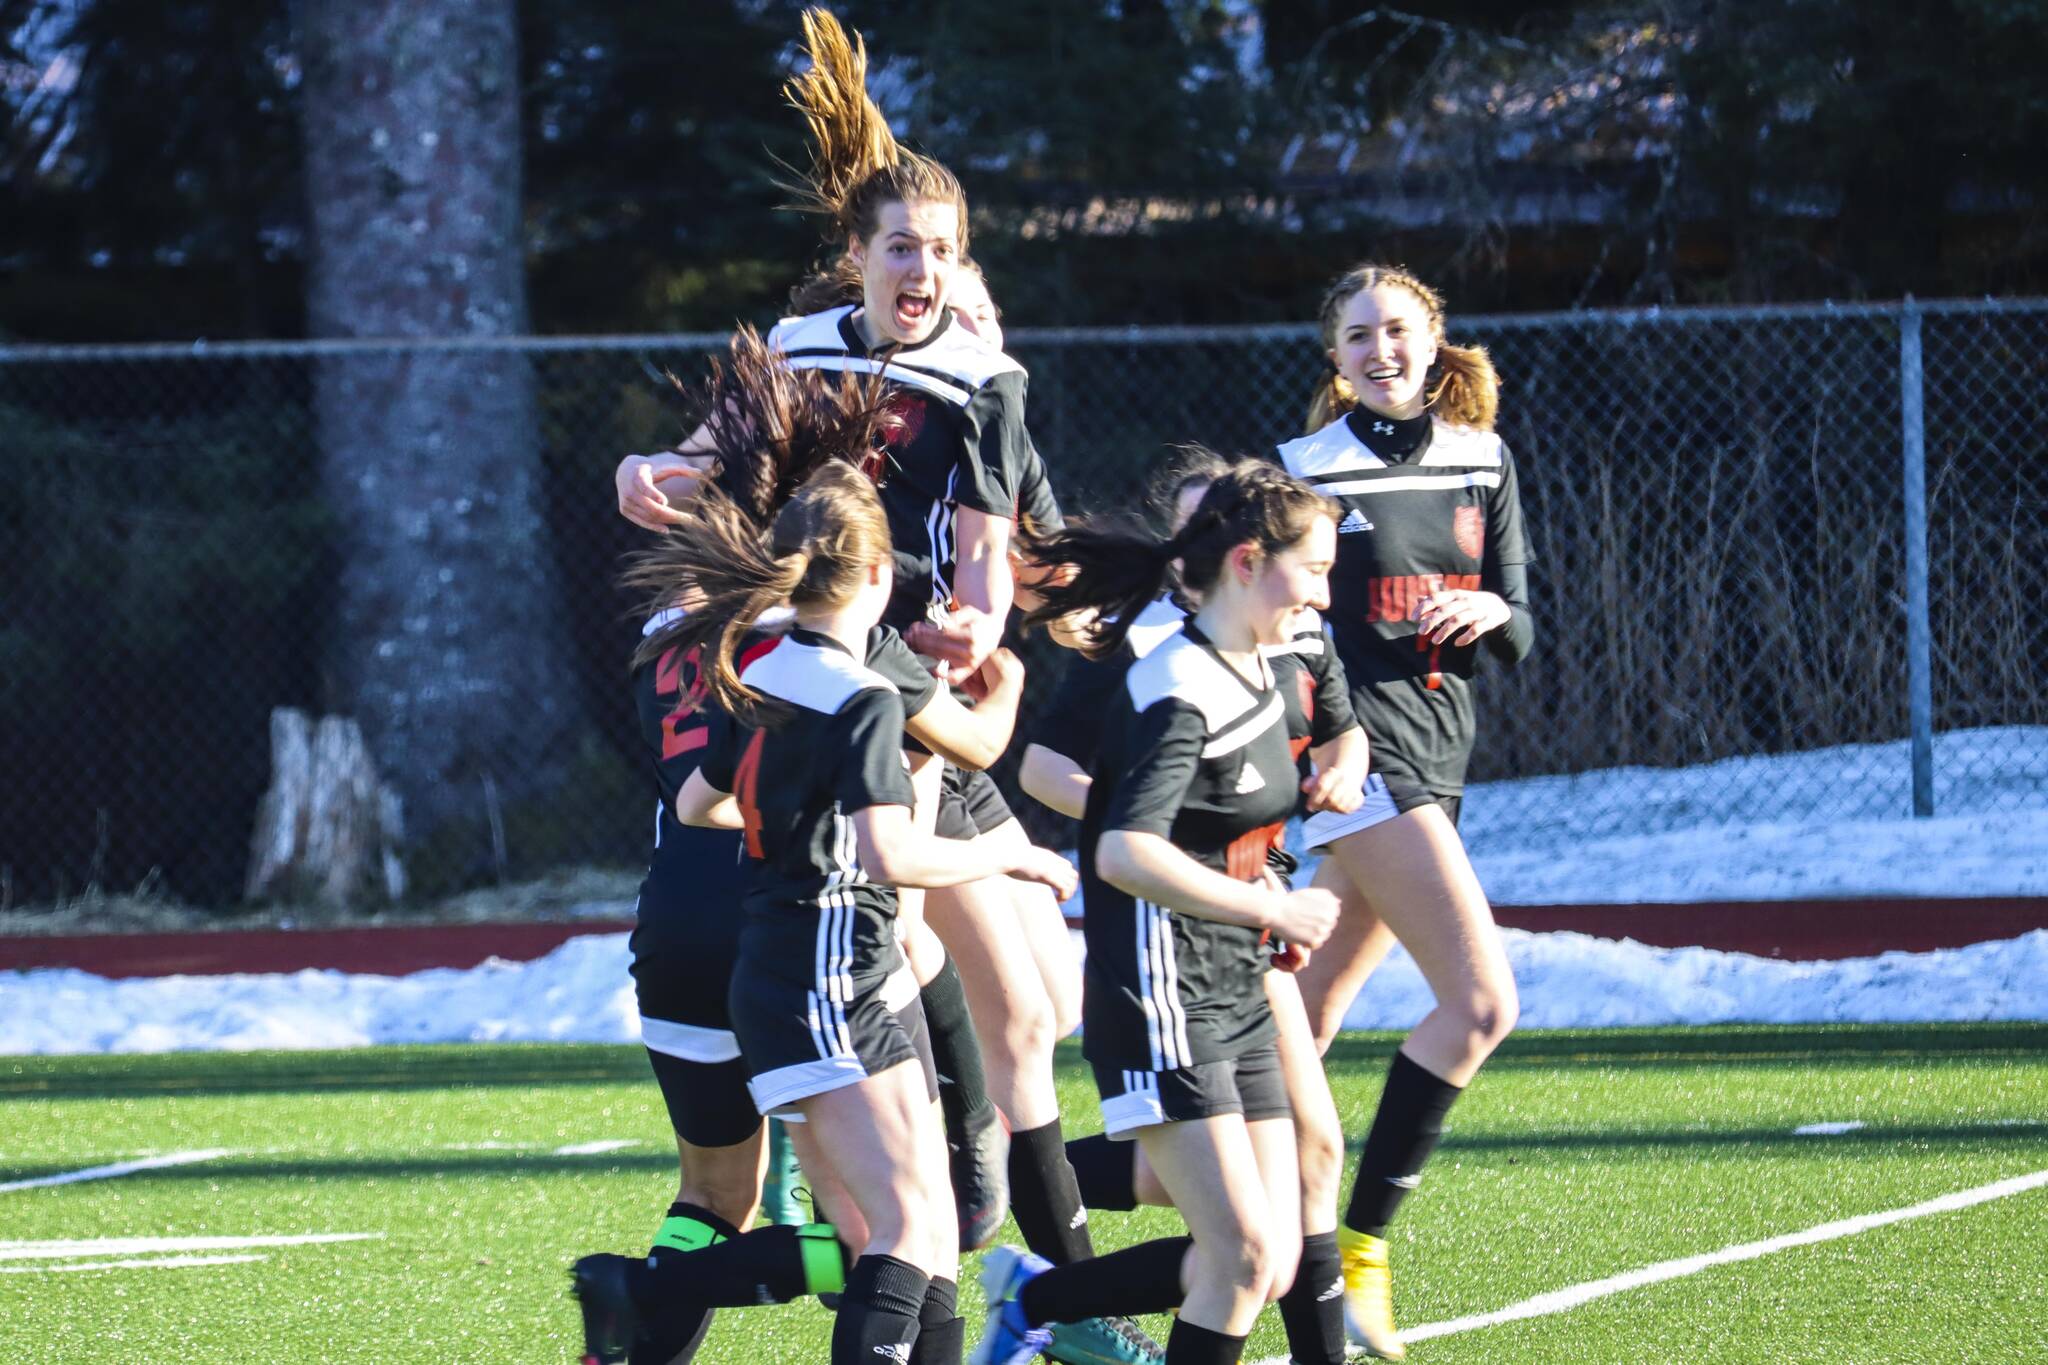 JDHS forward Kyla Bentz, top center, celebrates with her team after scoring on TMHS during a game at Adair-Kennedy Memorial Park on April 12, 2022. (Michael S. Lockett / Juneau Empire)